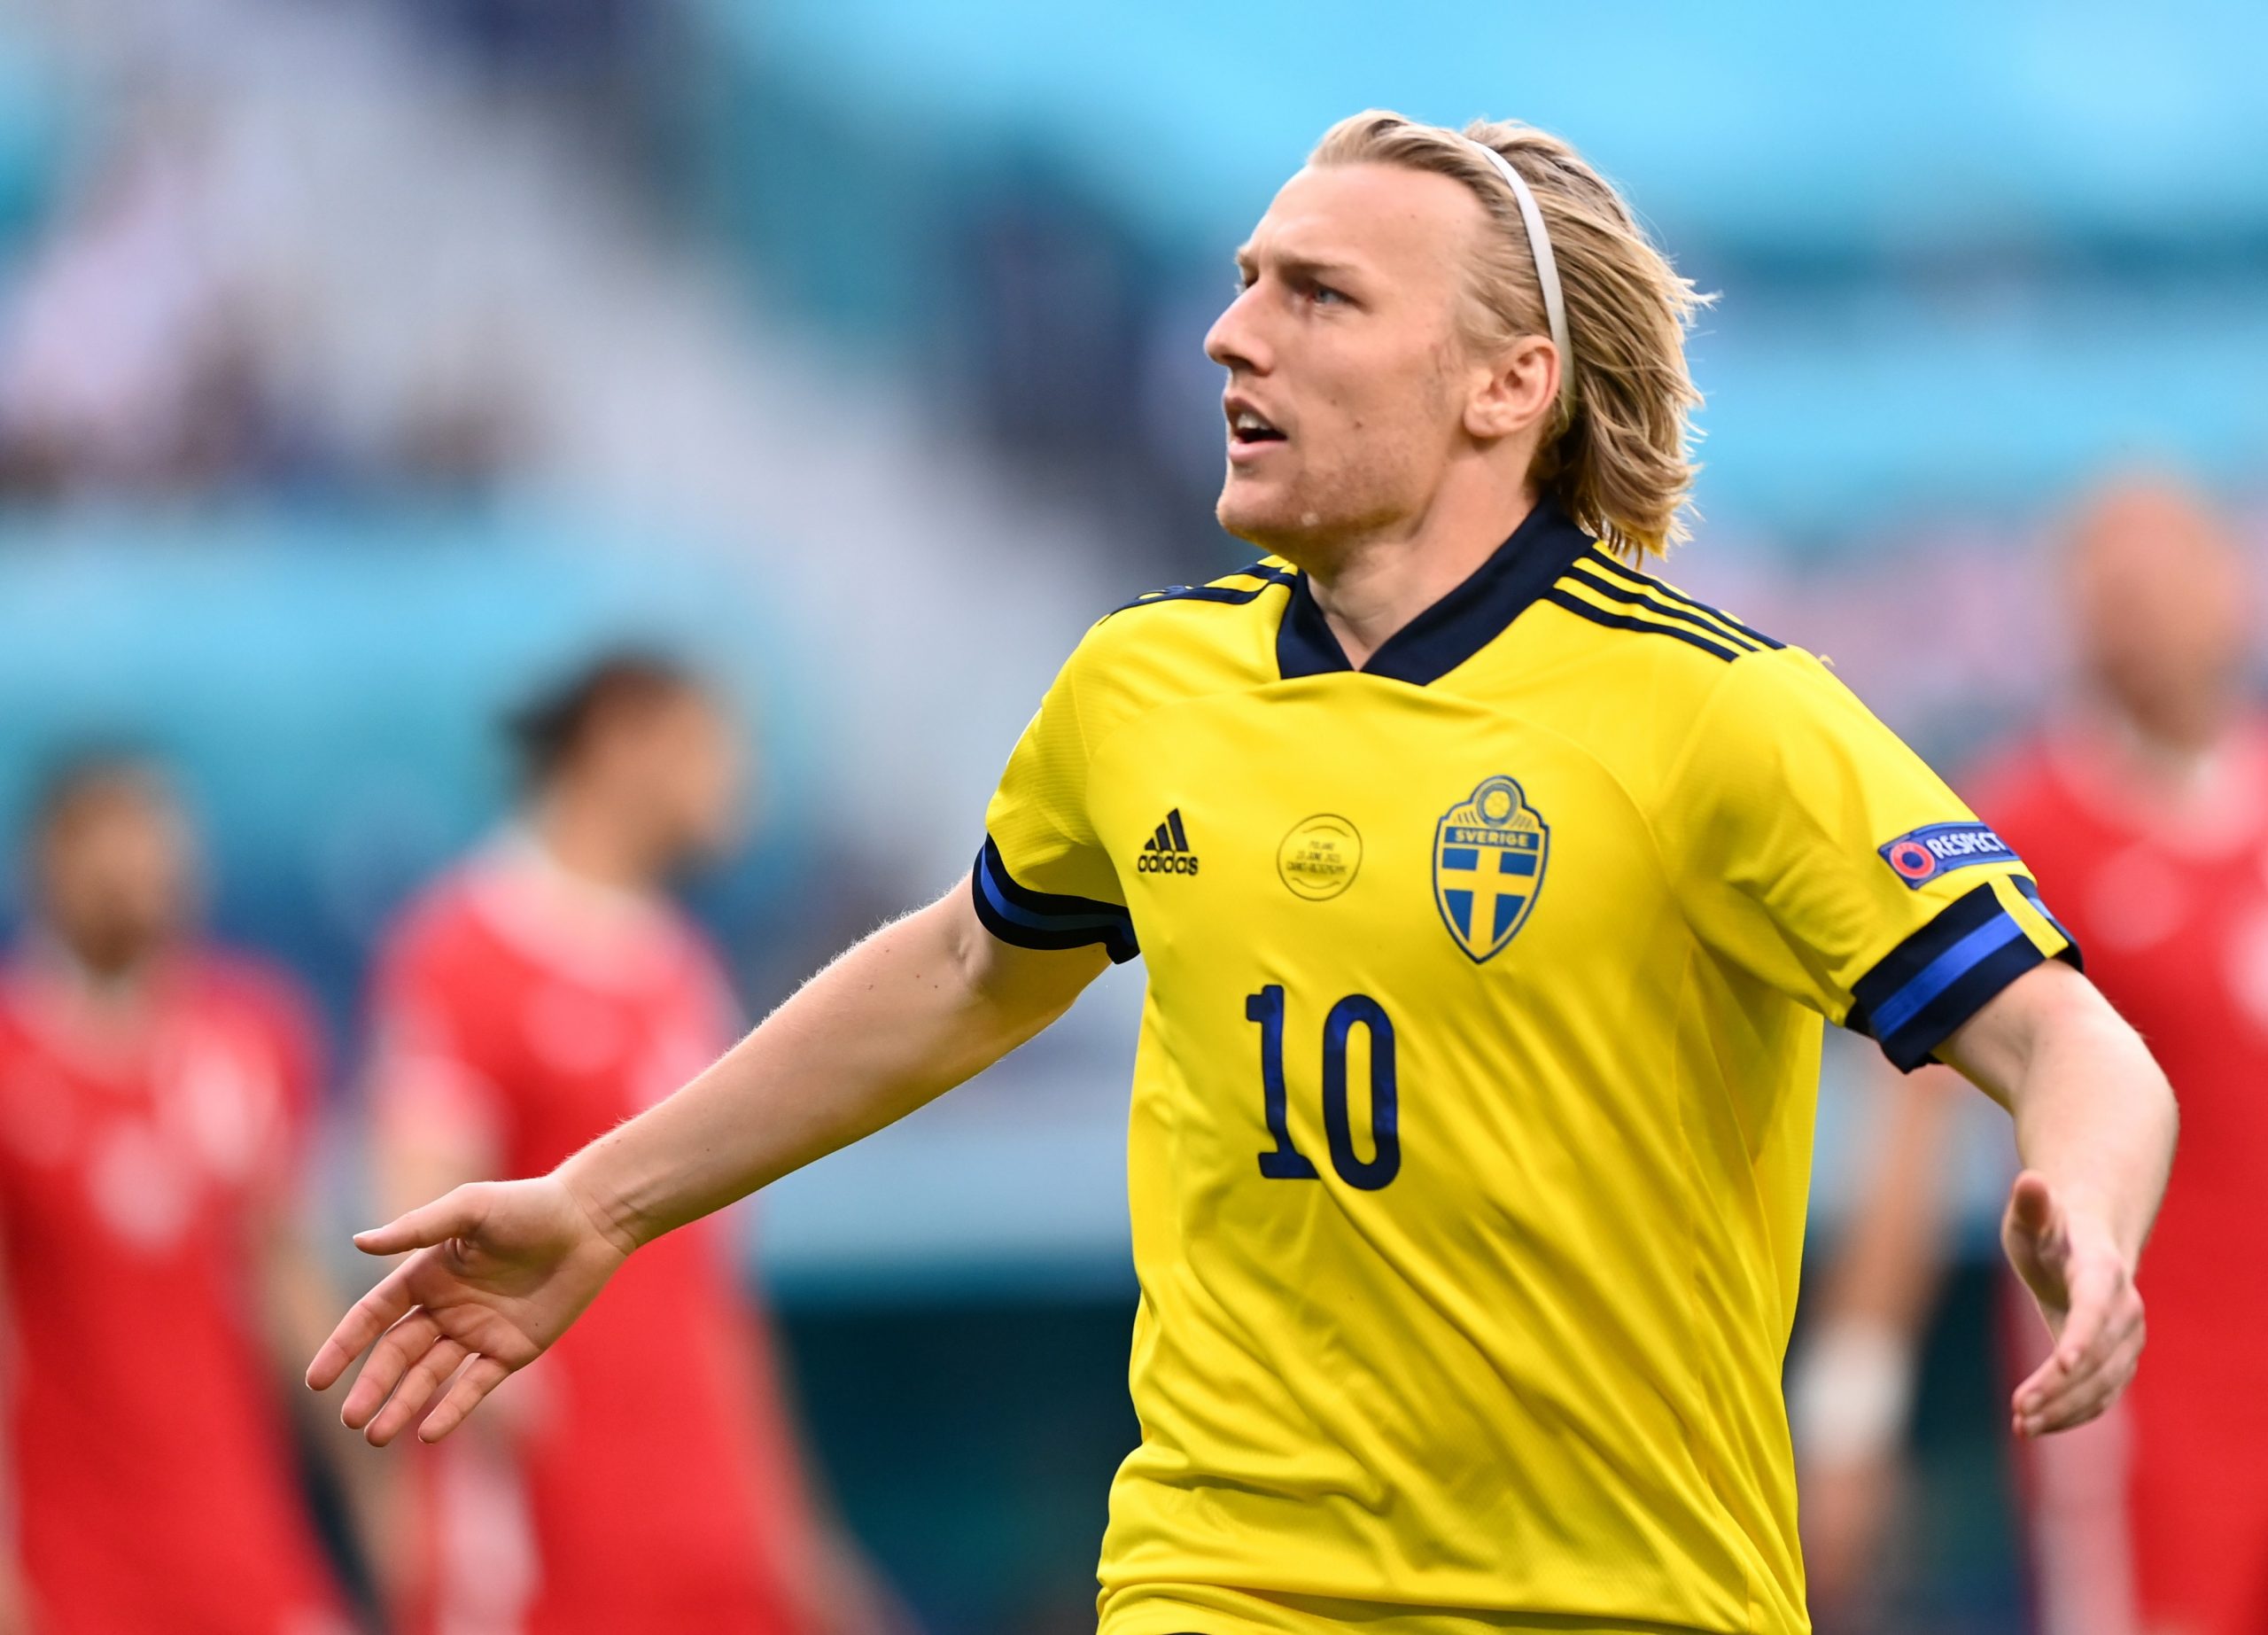 epa09295798 Emil Forsberg of Sweden celebrates scoring the opening goal during the UEFA EURO 2020 group E preliminary round soccer match between Sweden and Poland in St.Petersburg, Russia, 23 June 2021.  EPA/Kirill Kudryavtsev / POOL (RESTRICTIONS: For editorial news reporting purposes only. Images must appear as still images and must not emulate match action video footage. Photographs published in online publications shall have an interval of at least 20 seconds between the posting.)